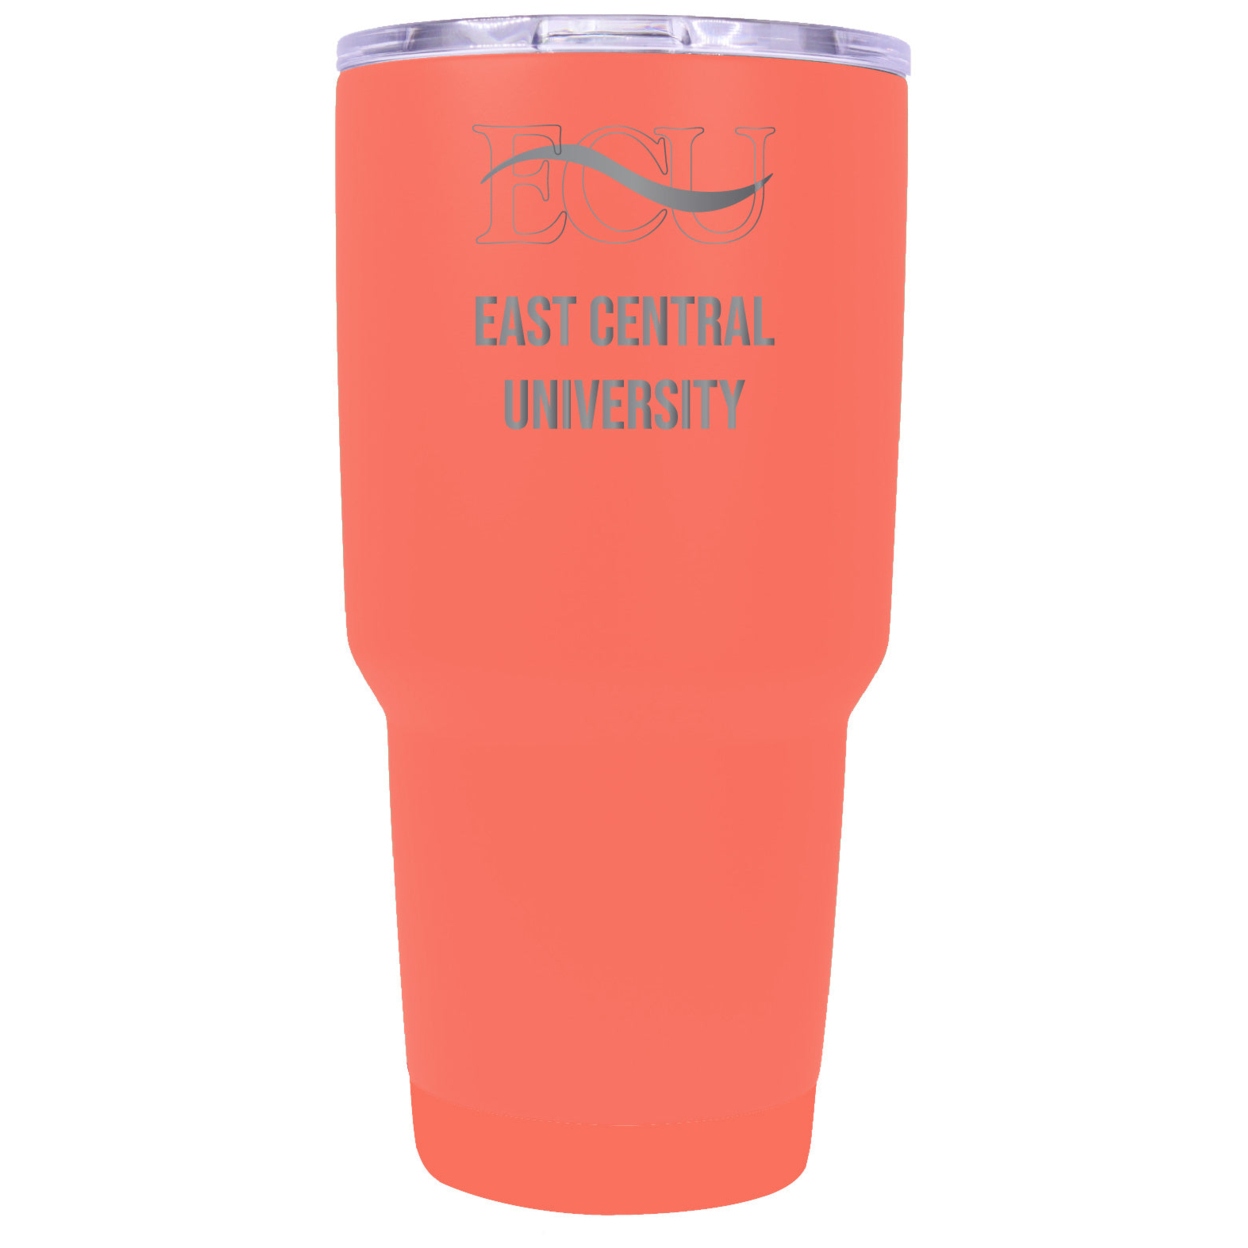 East Central University Tigers 30 Oz Laser Engraved Stainless Steel Insulated Tumbler Choose Your Color.